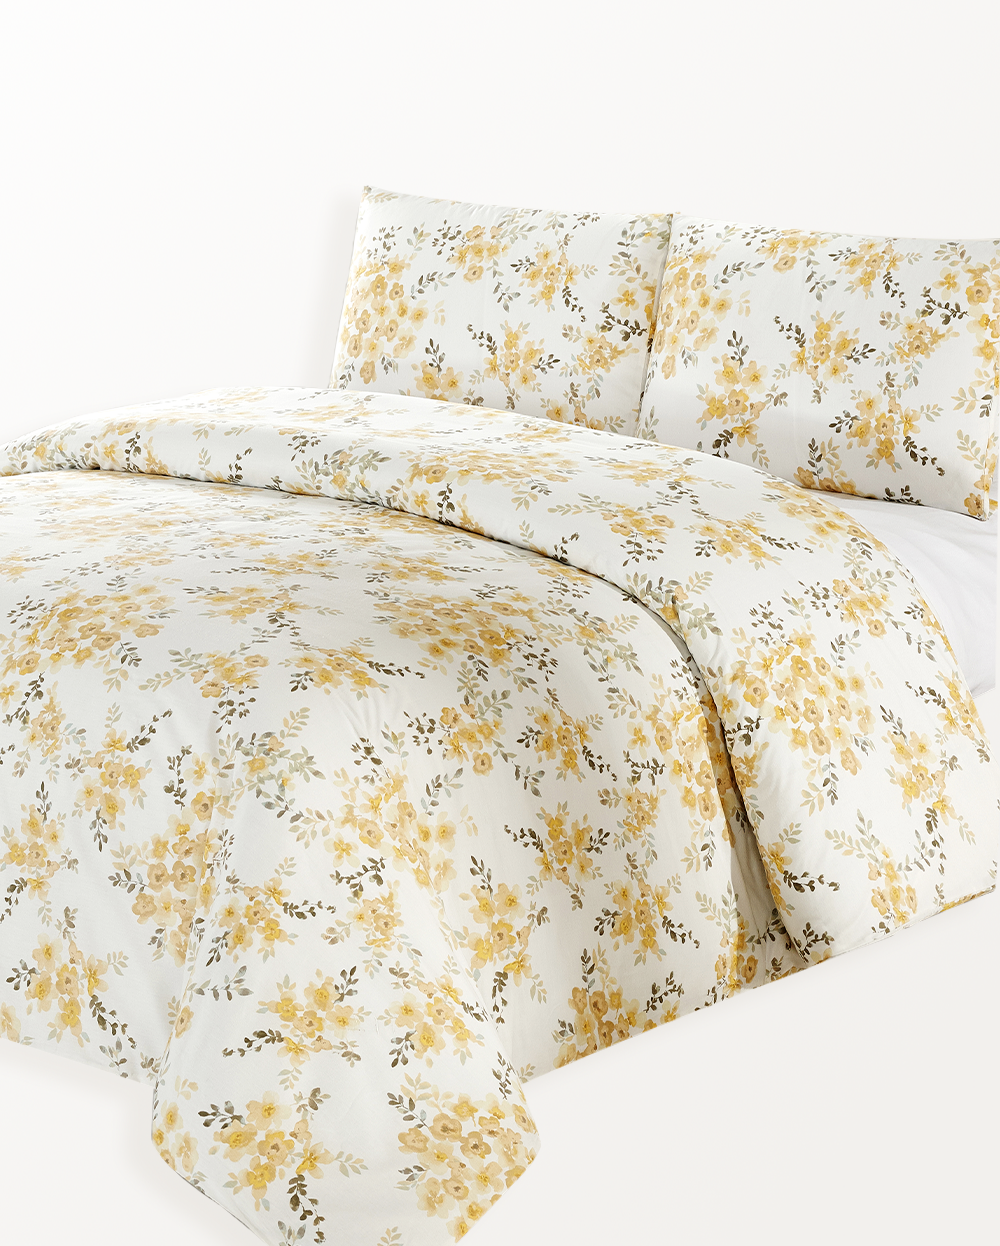 High Quality Print Polyester Home Textile Yellow Printed Comforter Set  Beige Adult Quilt Duvet Covet Sets Premium Pillow Shams Queen Size Bedding  Supplier - China Bedding Set and Bed Sheet price